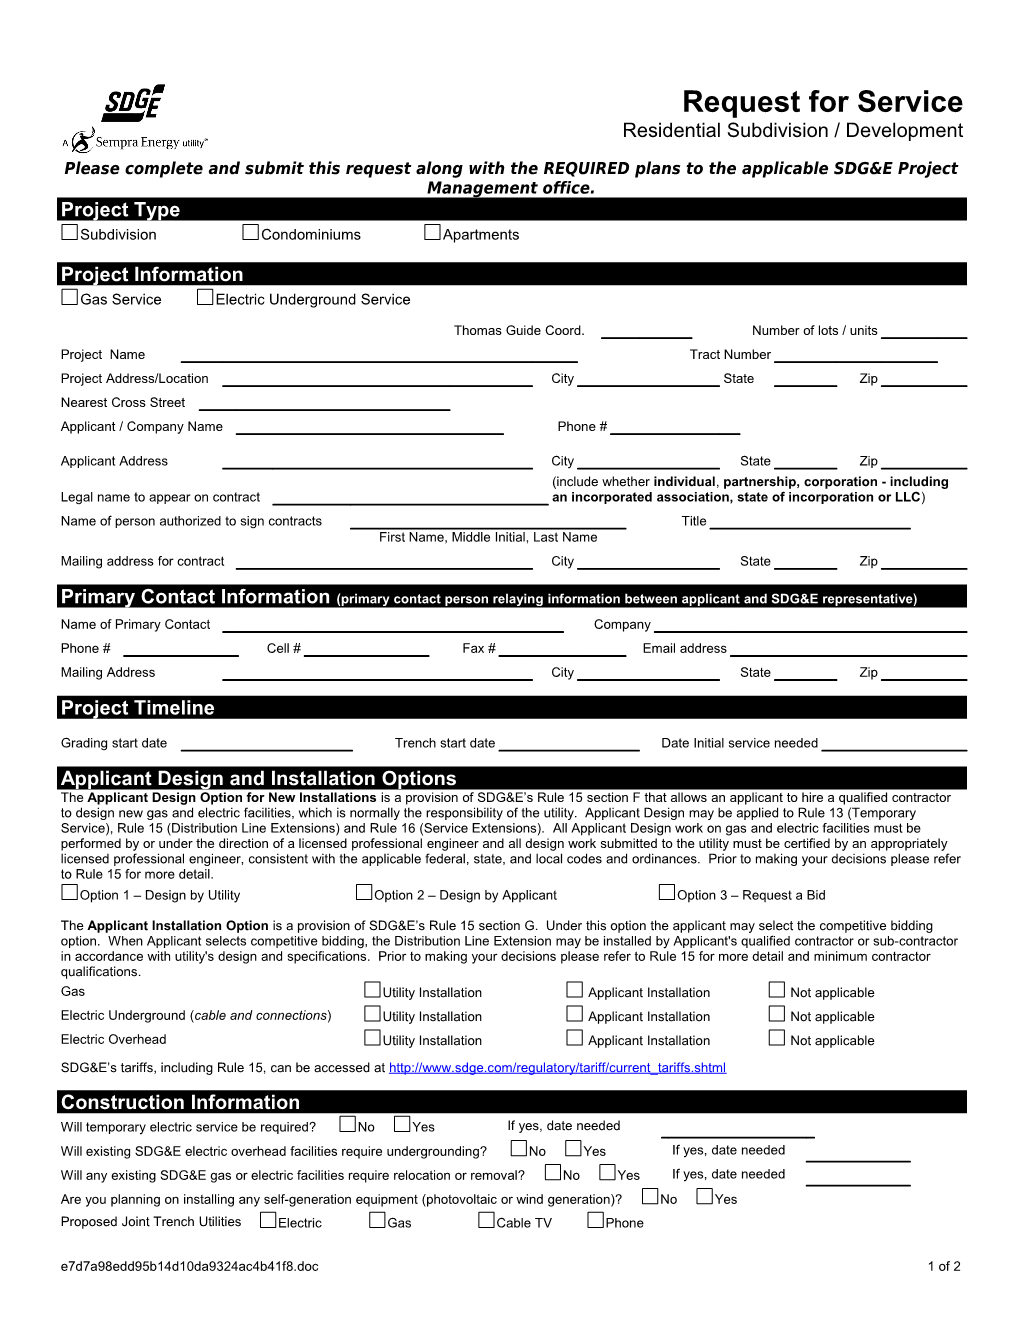 Residential/Subdivision Request for Service Form